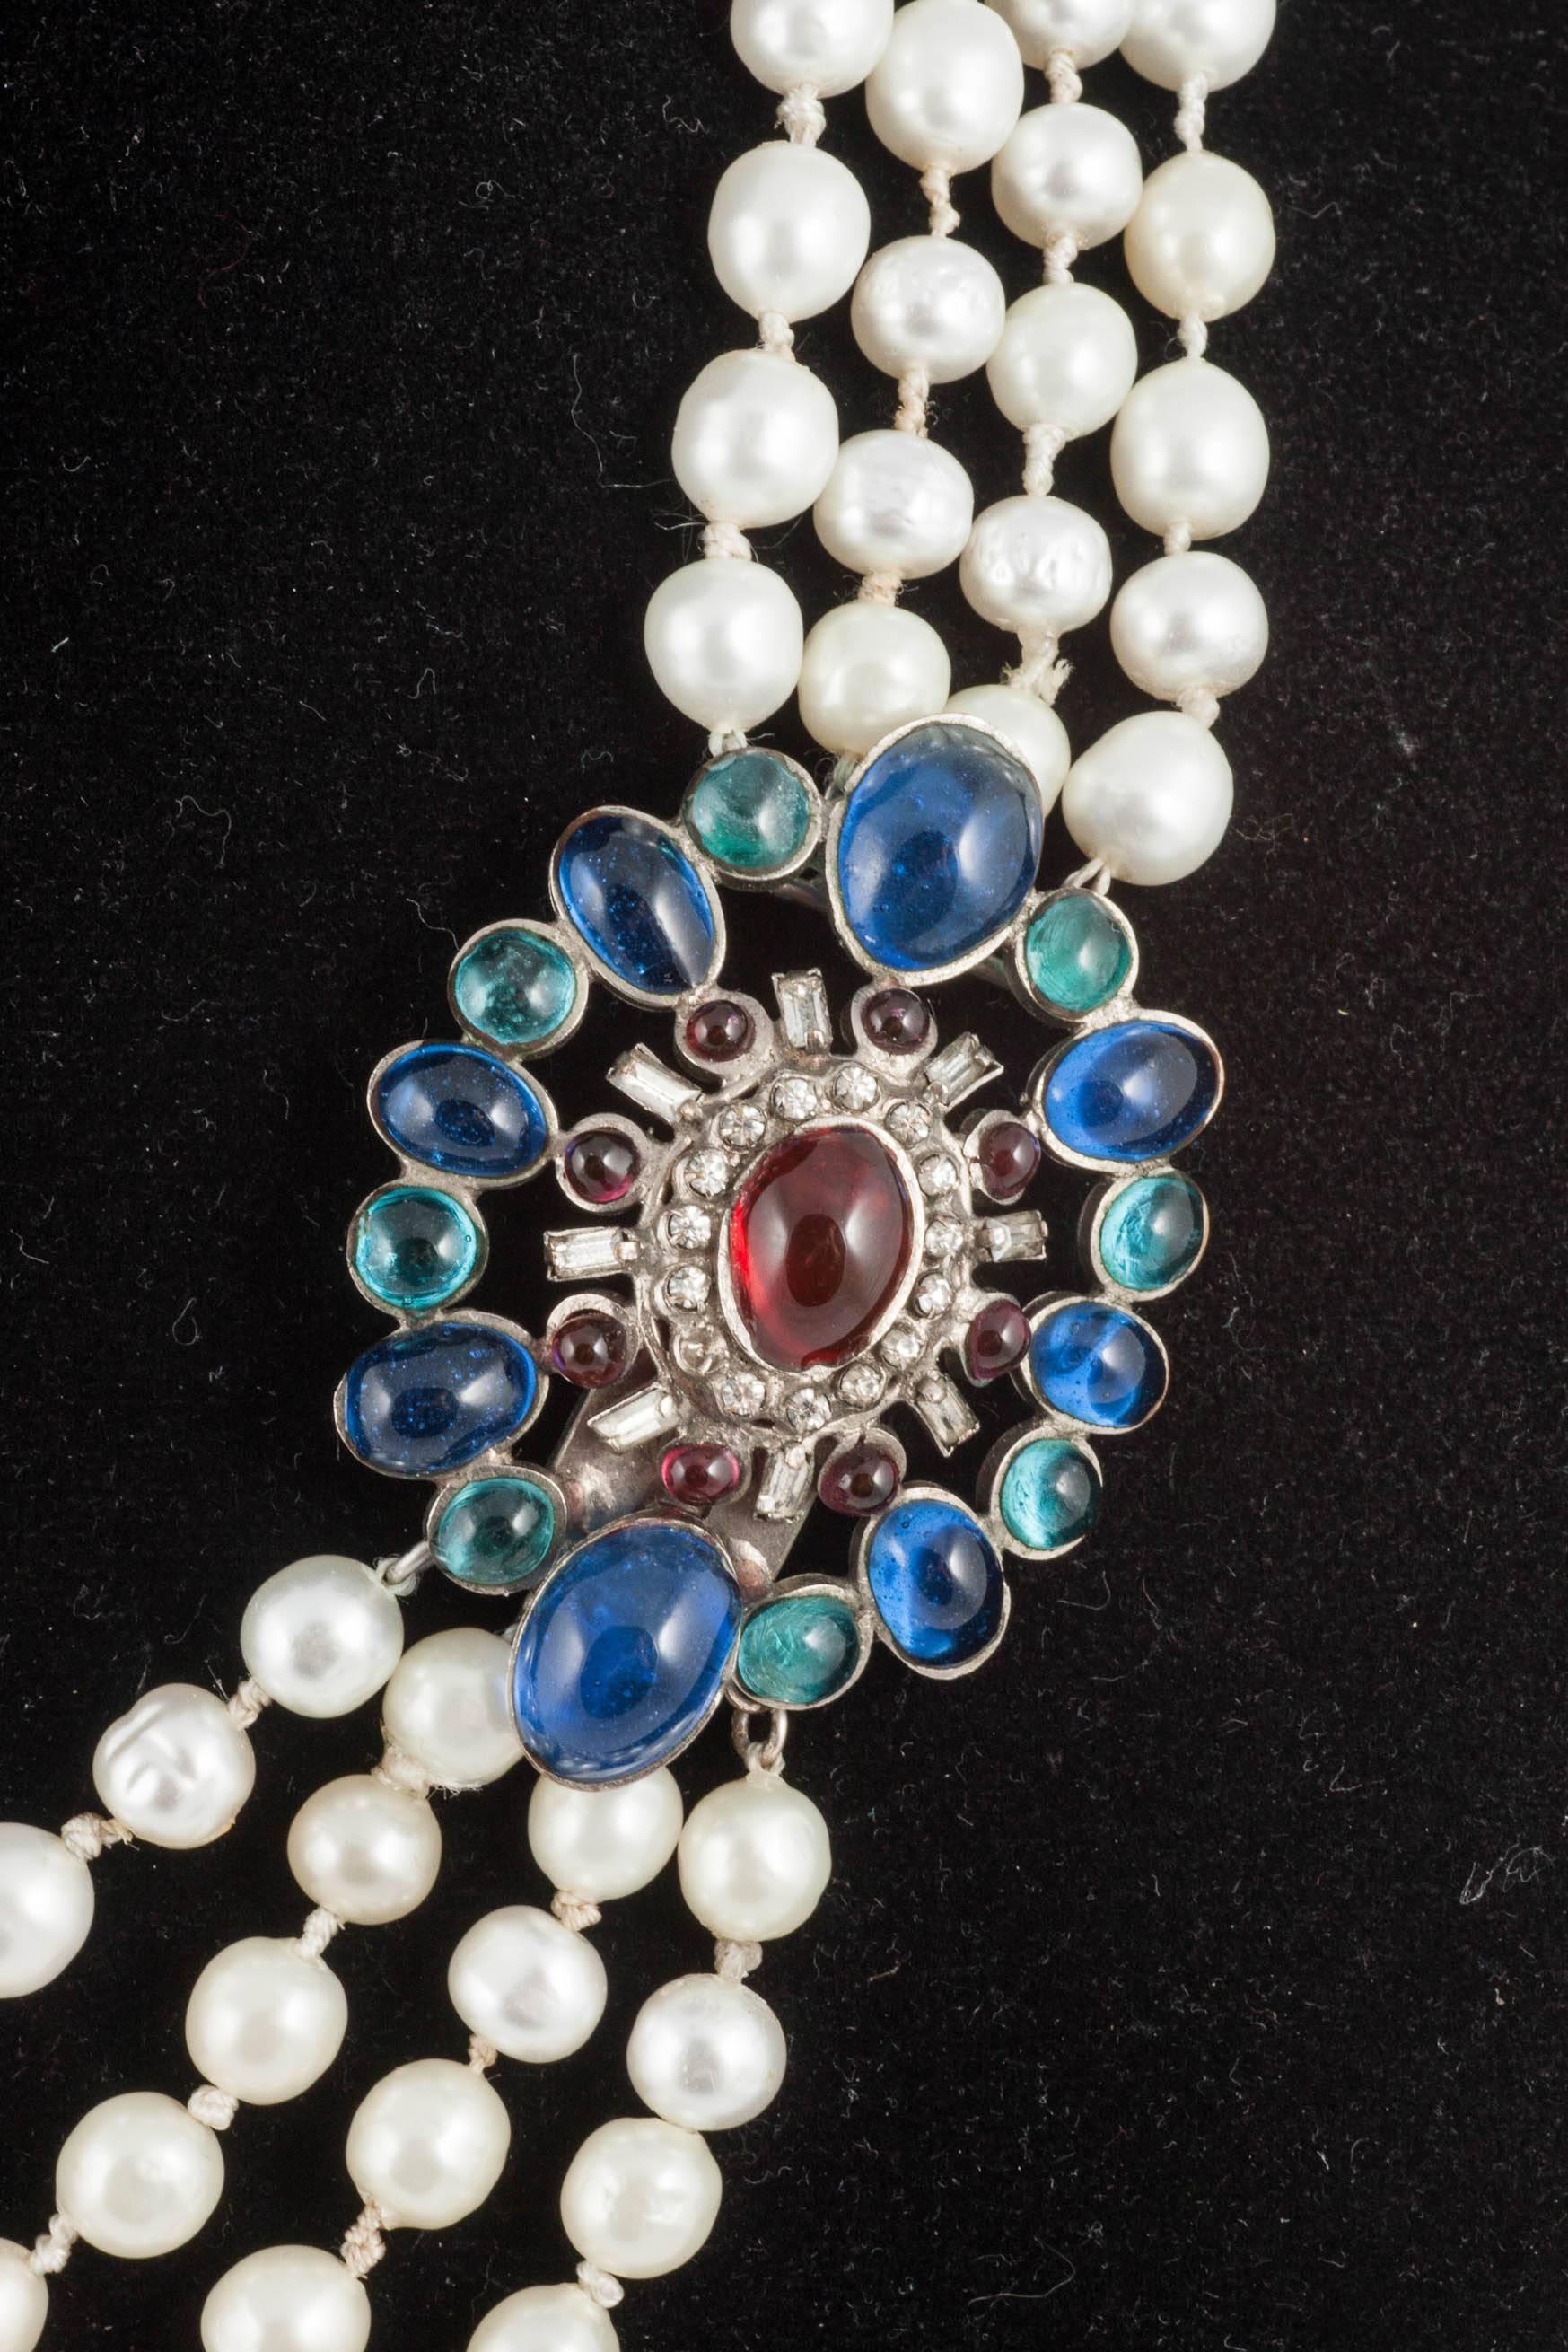 Elegant and timeless, this graduated necklace, made by Maison Gripoix, from the 1960s, is made from graduated glass, knotted  baroque pearls and a large and sumptuous poured glass clasp, a classic Chanel design, that can be seen in the form of a